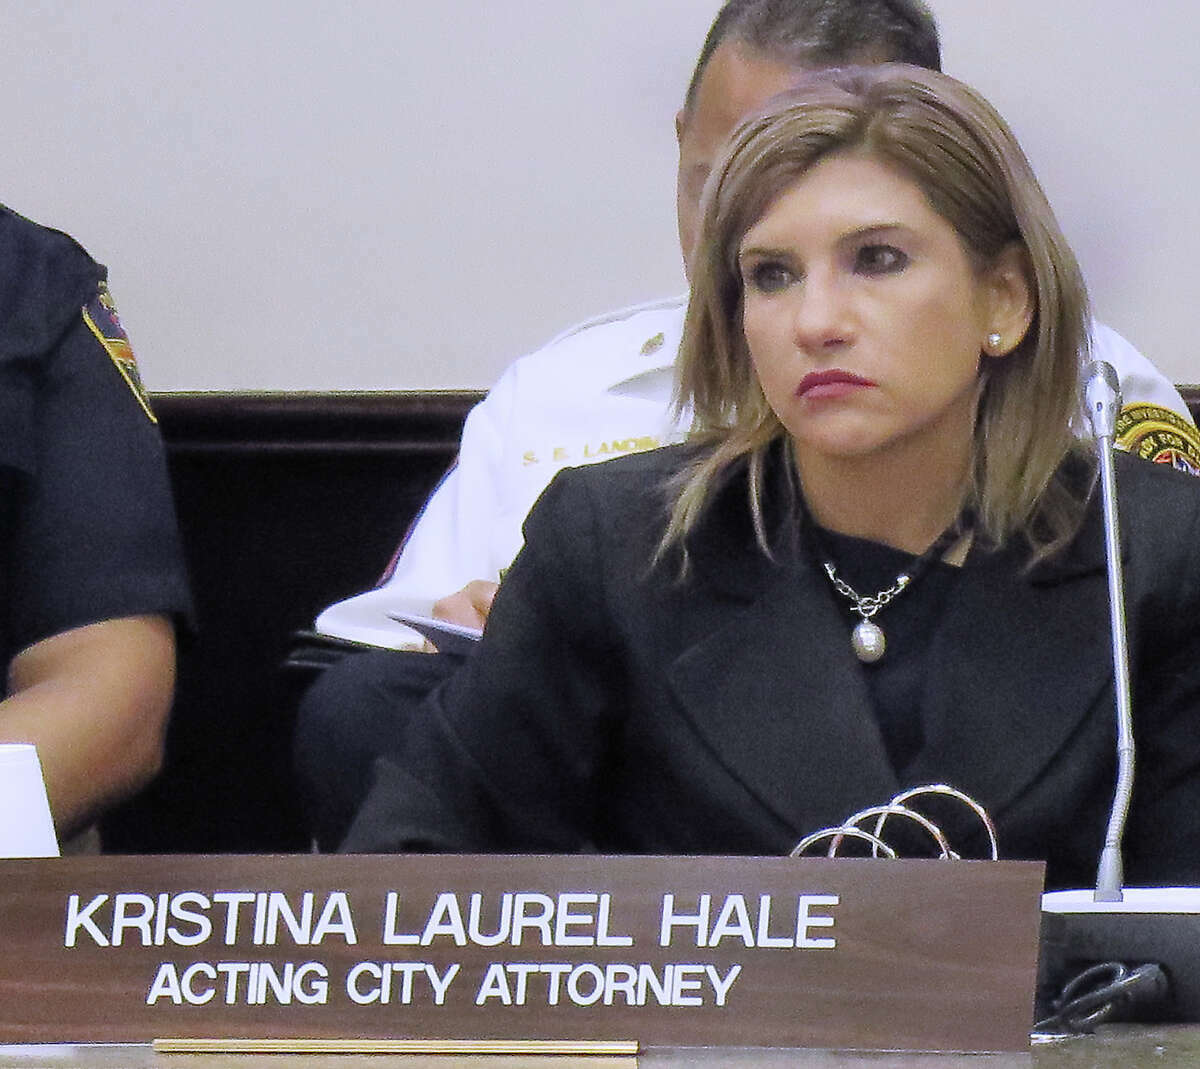 Laredo's Acting City Attorney Kristina Laurel Hale at City Council special meeting on May 8, 2017.